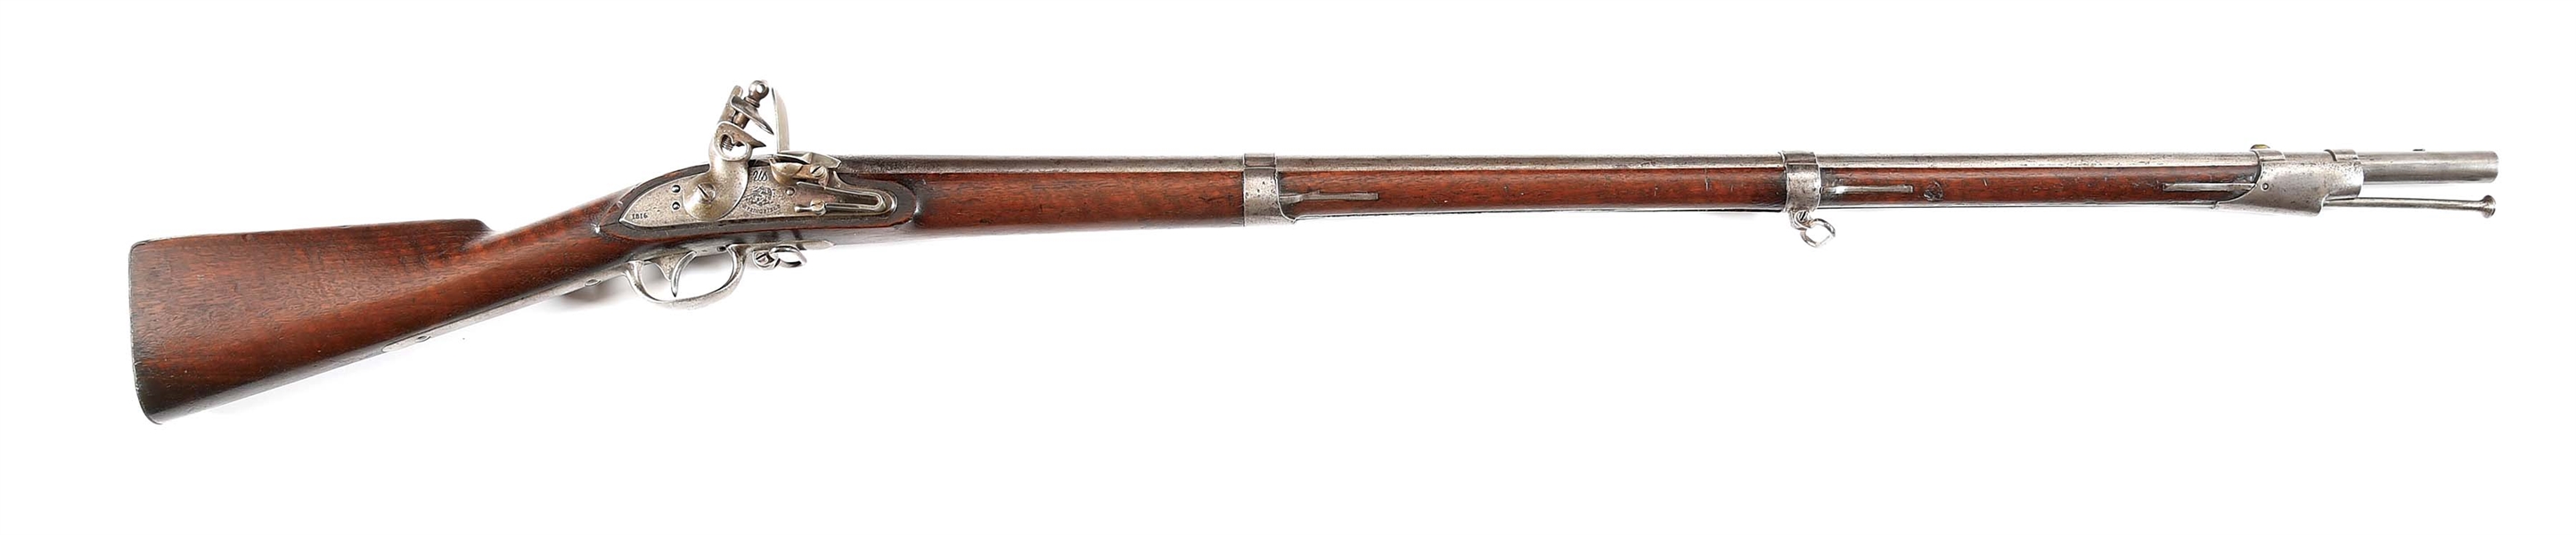 (A) US M1816 FLINTLOCK MUSKET BY SPRINGFIELD DATED 1816.